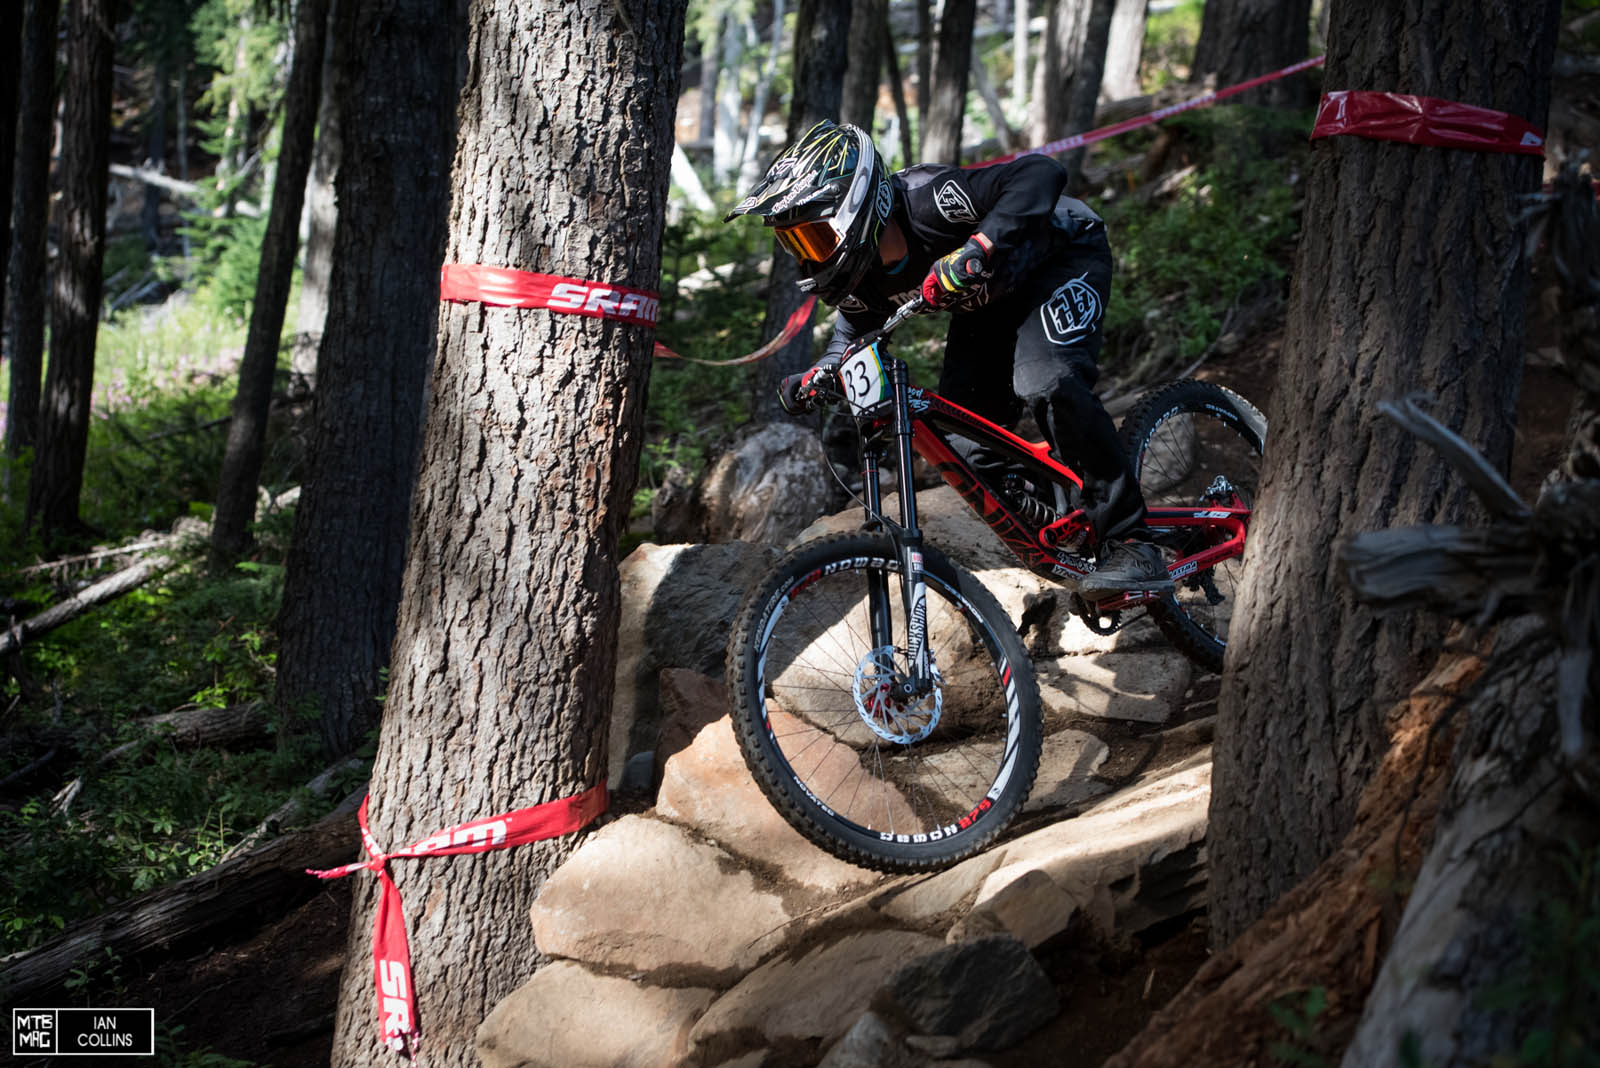 Mikey Sylvestri on a DH bike holding it down for team USA Freeride.